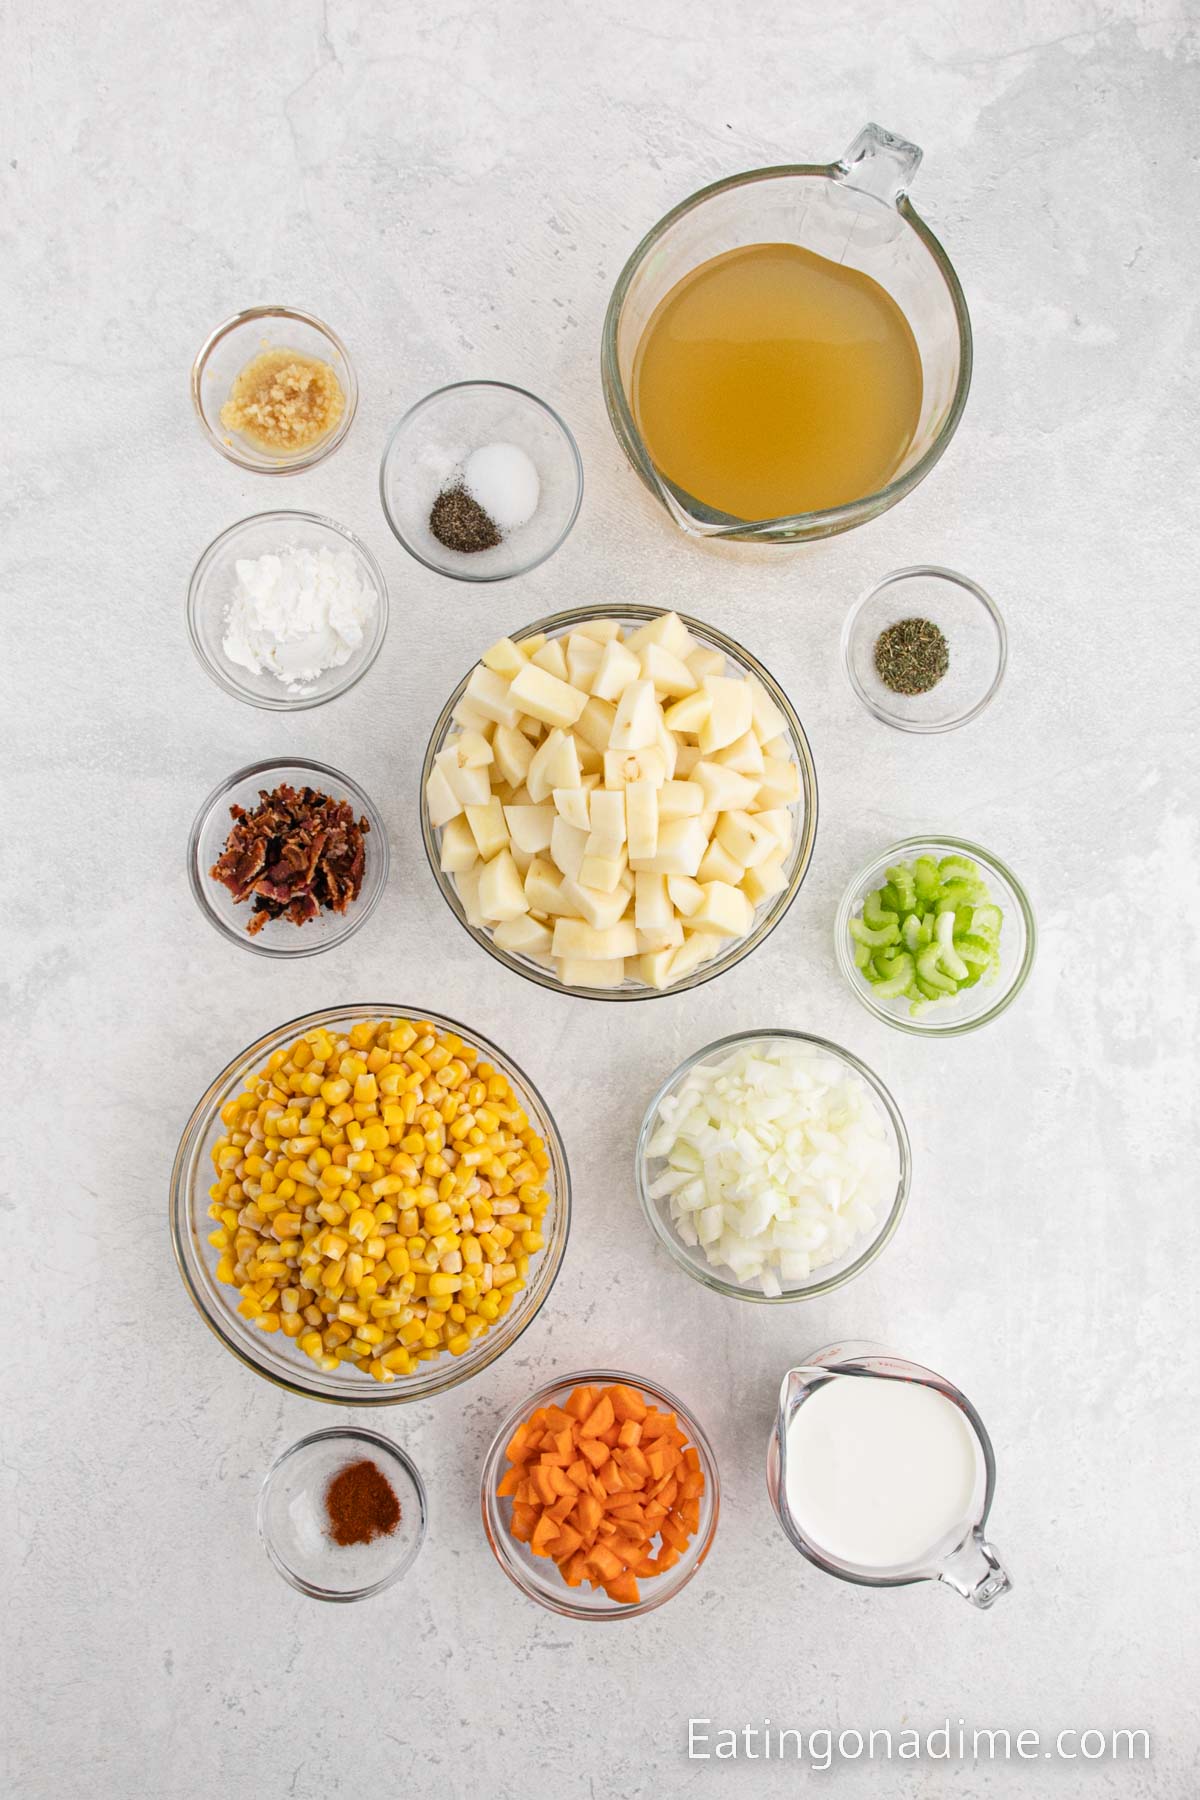 Ingredients needed to make potato and corn chowder soup